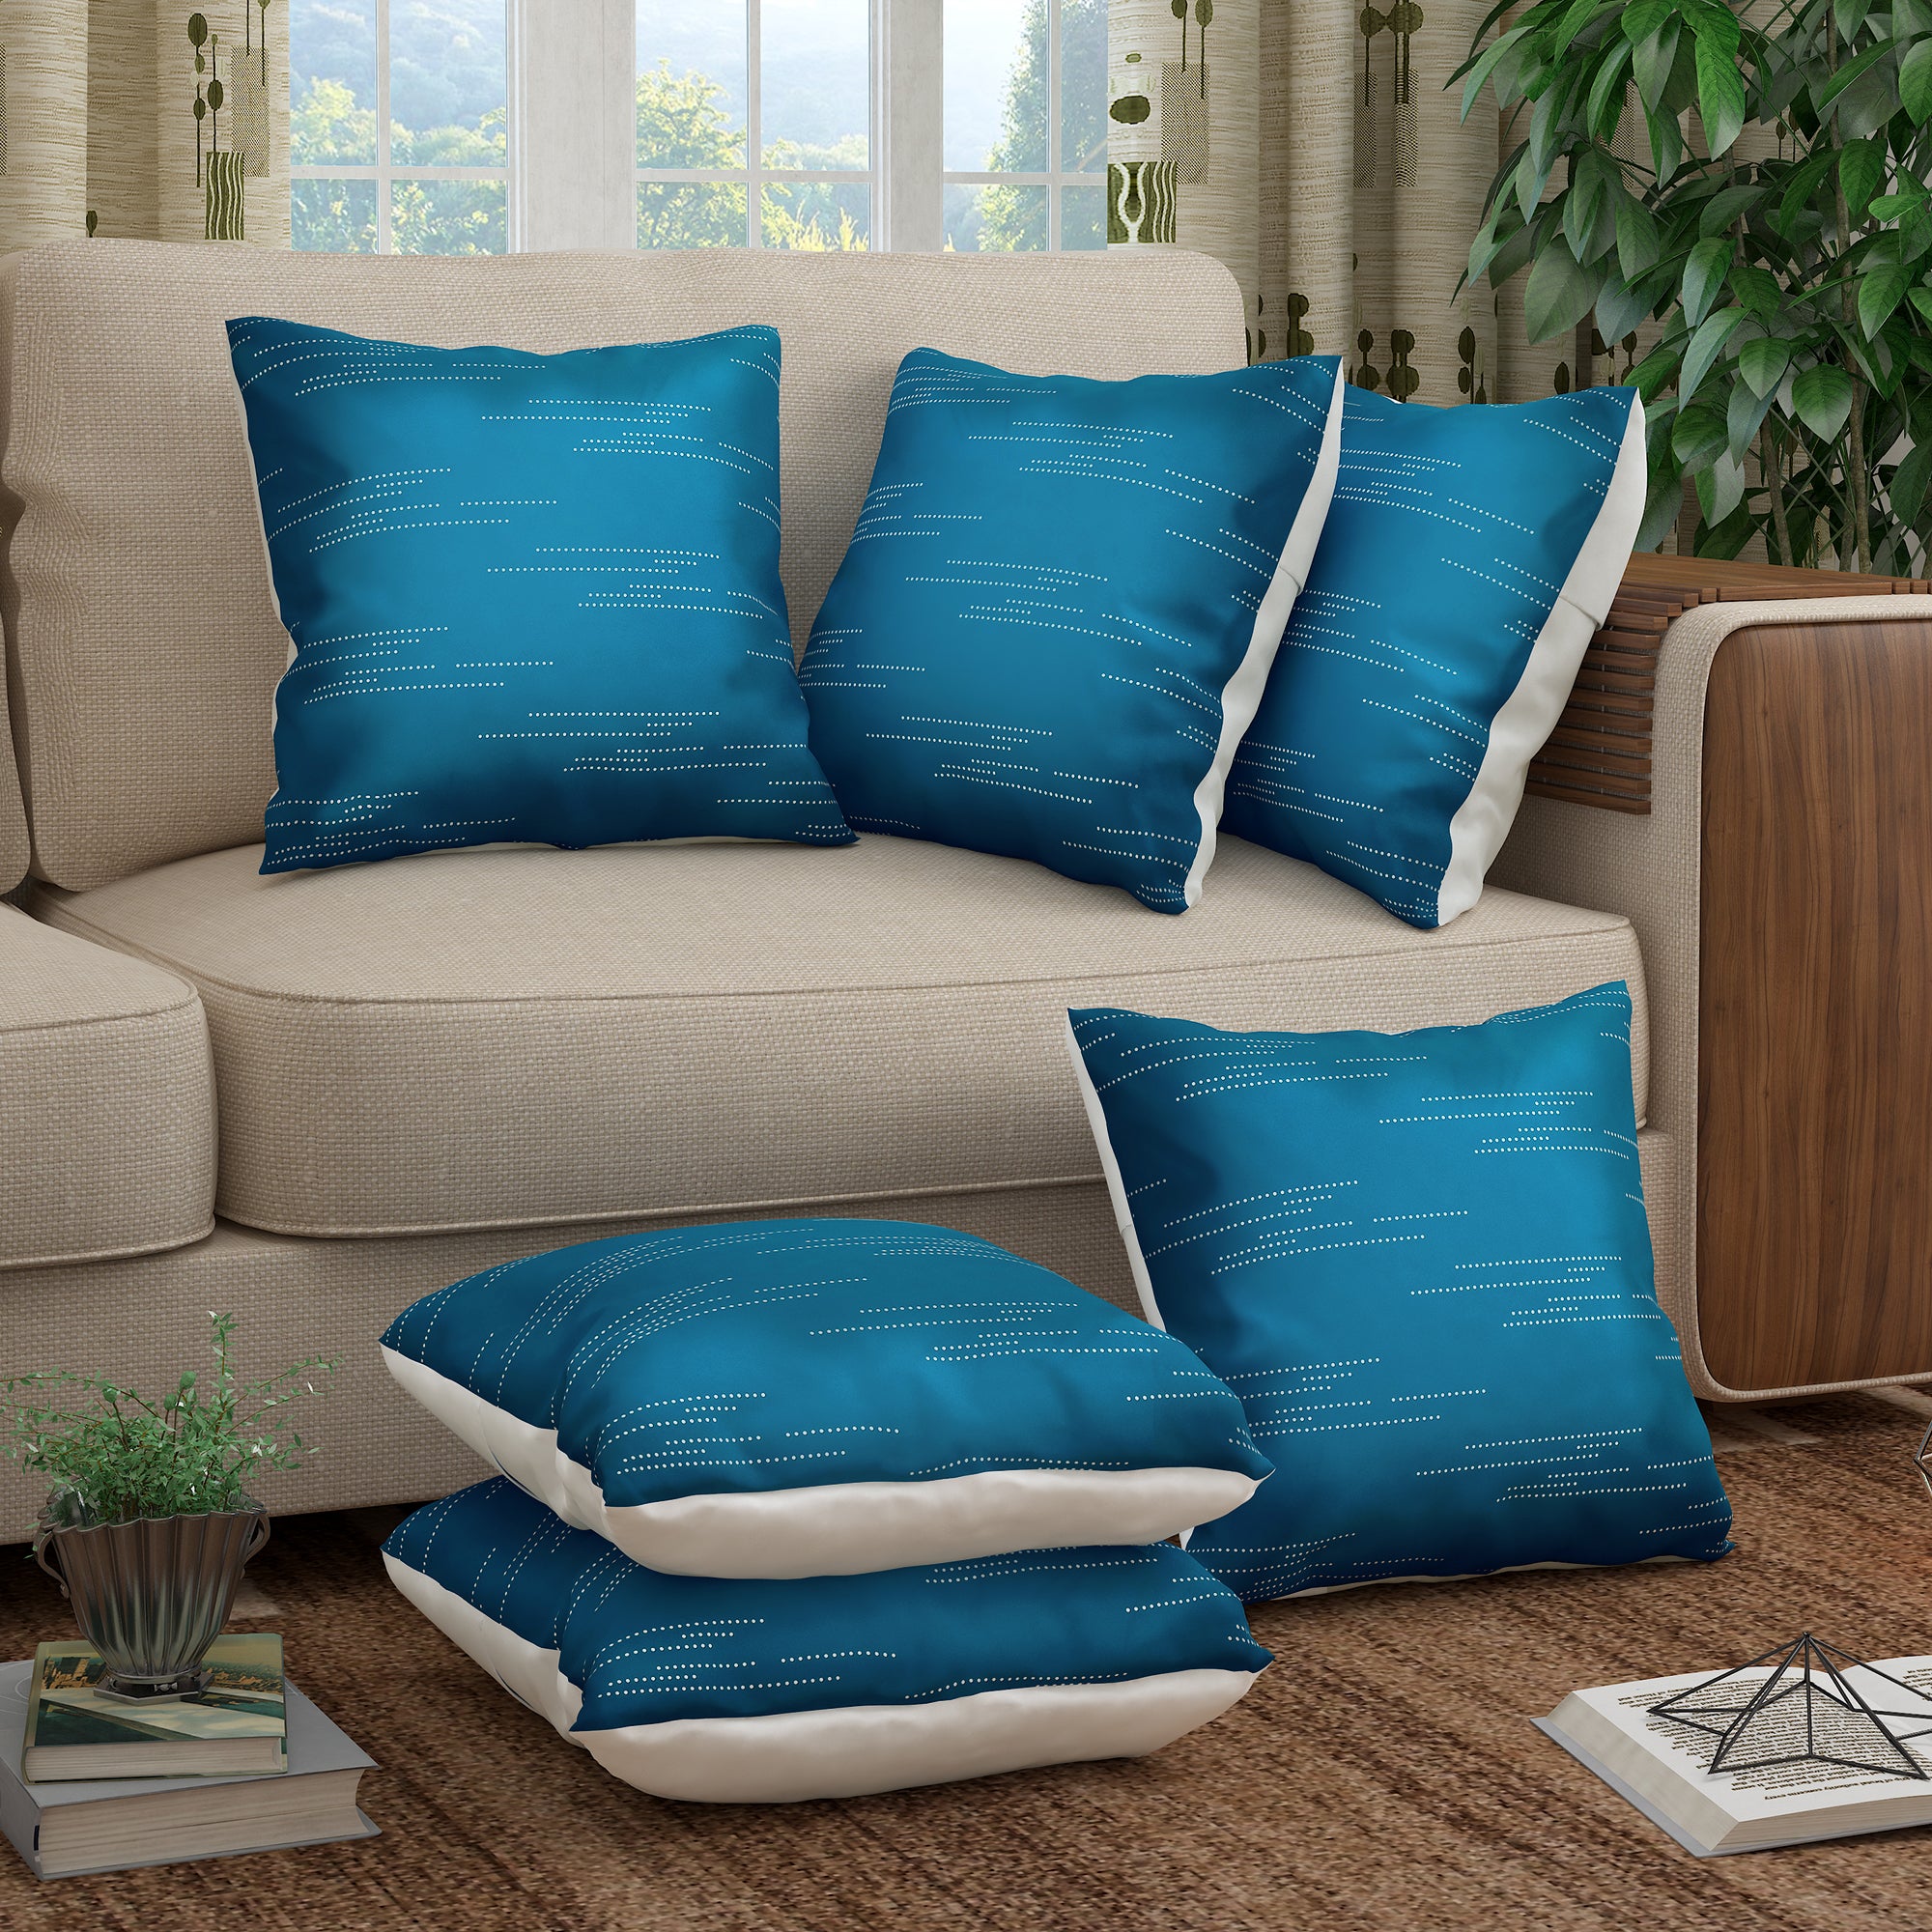 Story@Home Cyan Blue Dotted Lines Polyester 6 pcs of Alegra Cushion Covers